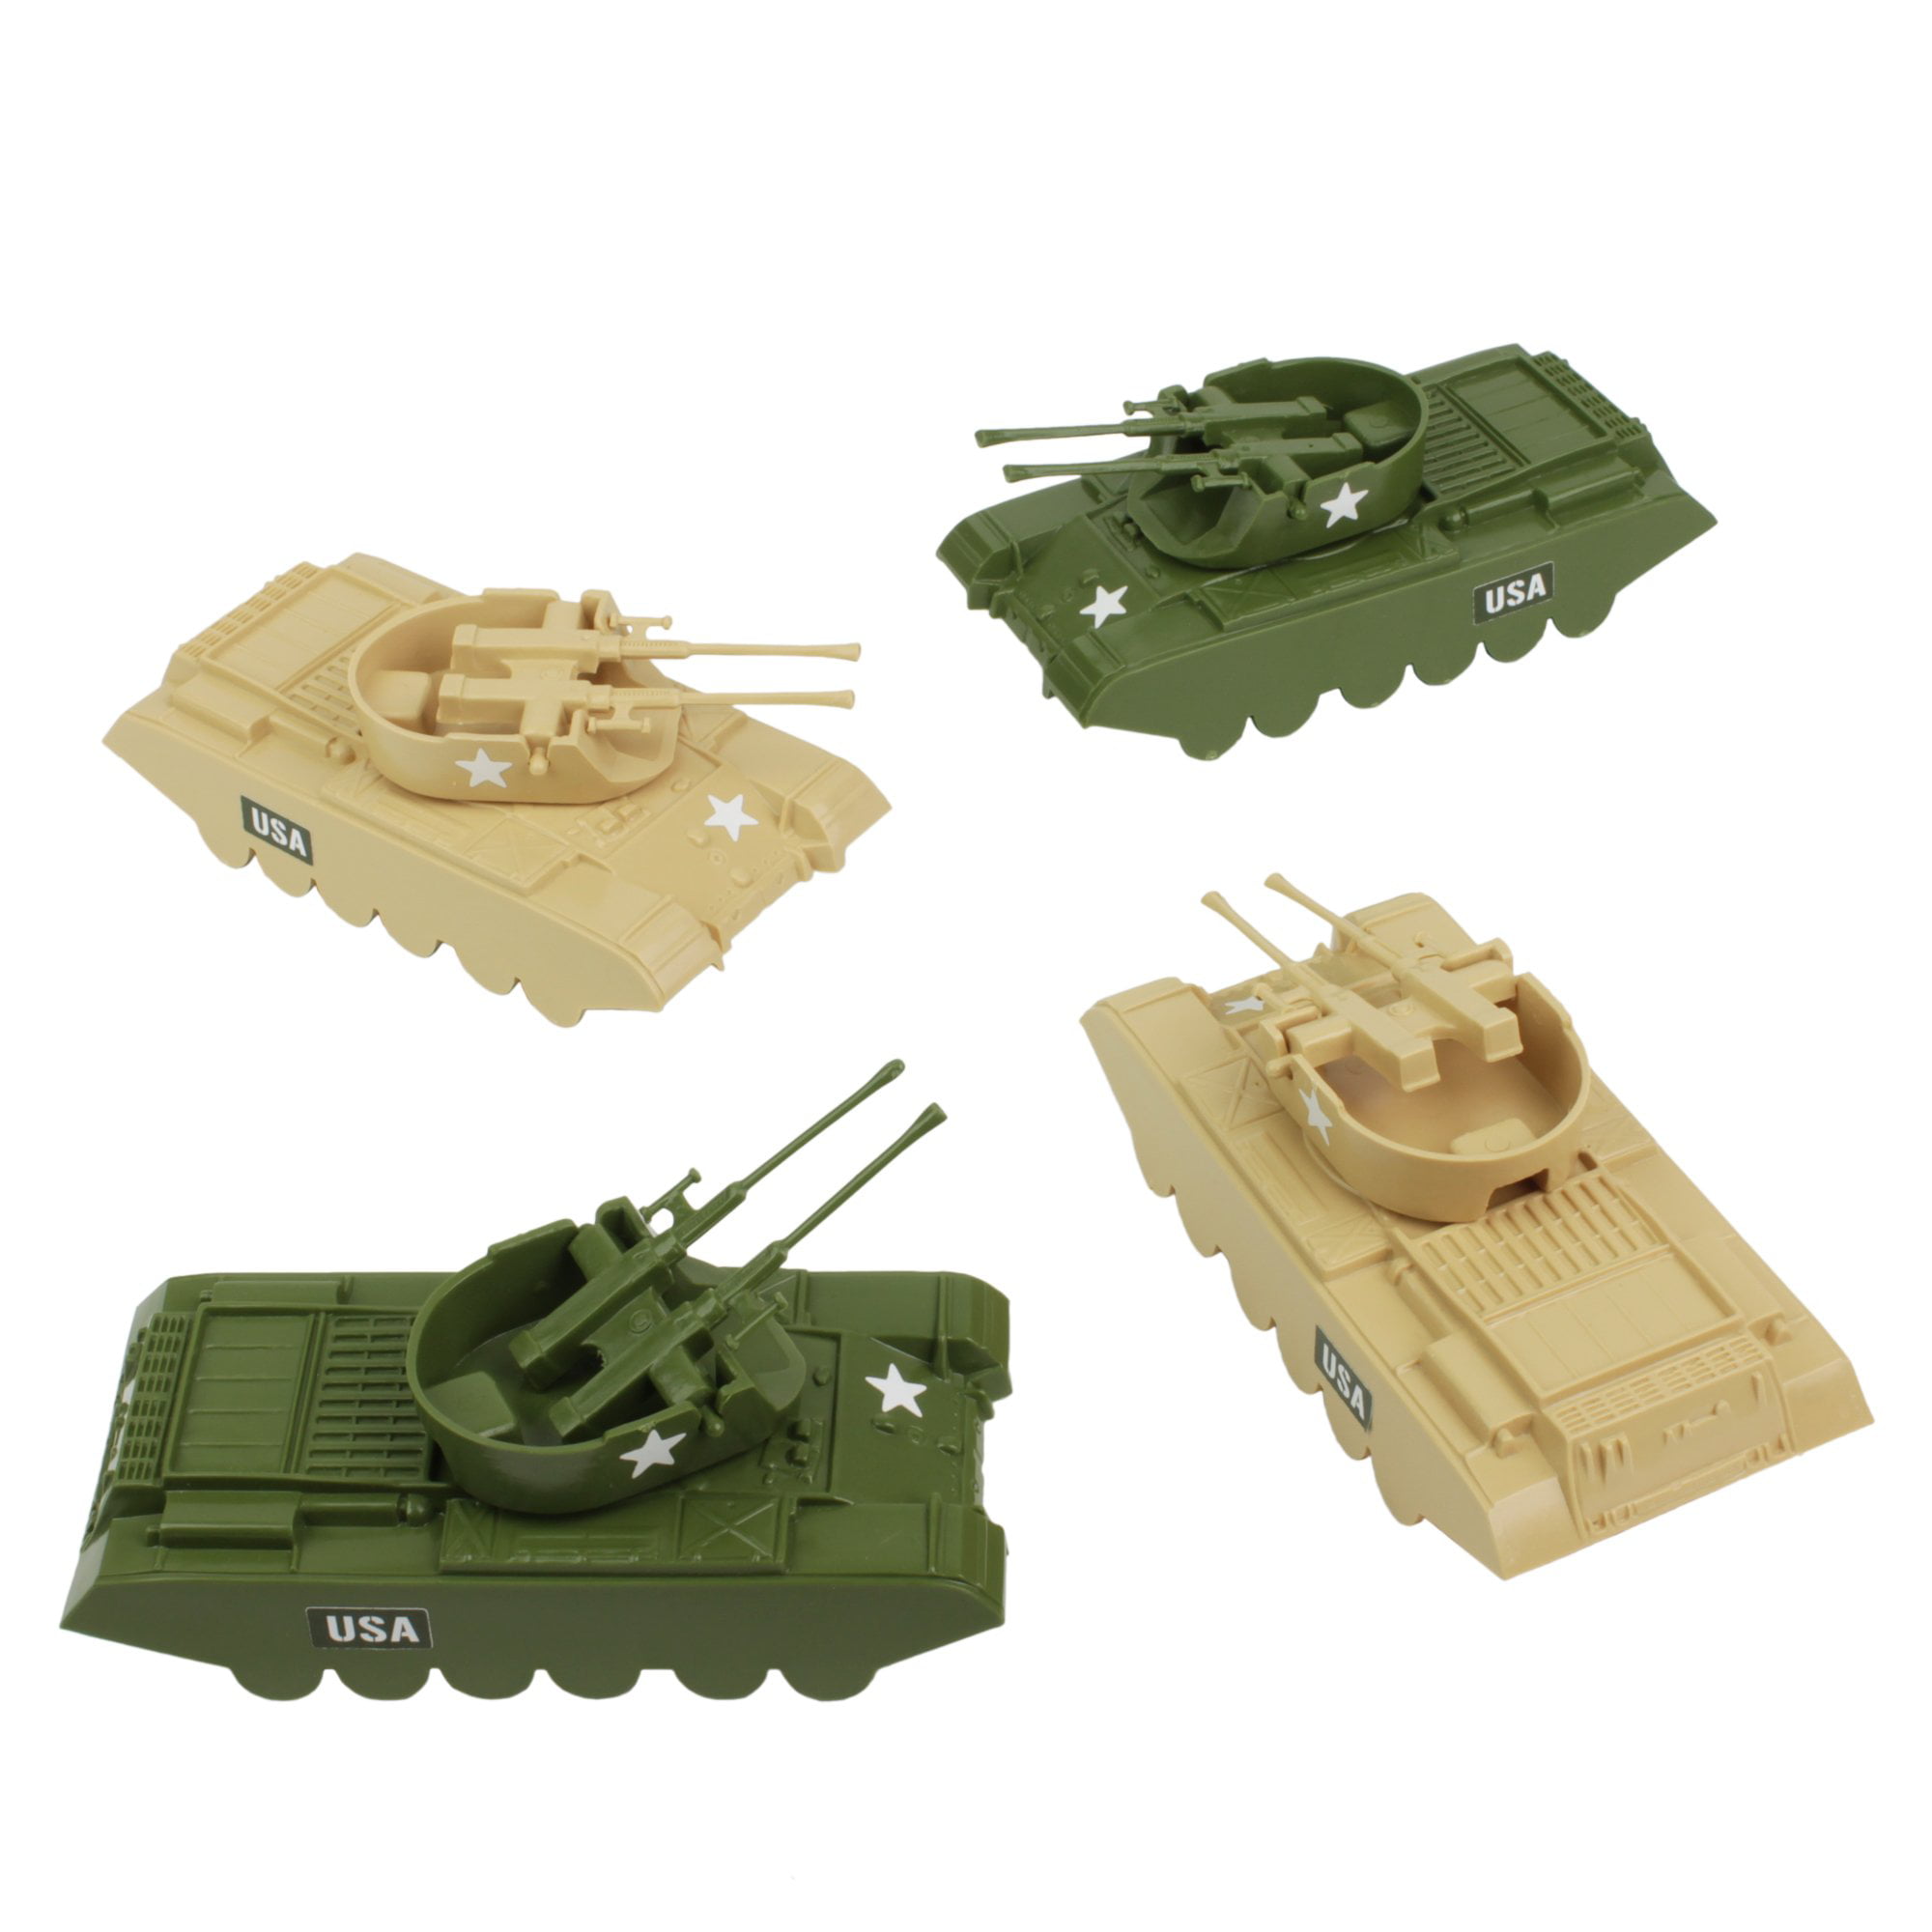 New Green Army Tank Cannon Model Toy Military Vehicles Plastic Toy Soldiers 